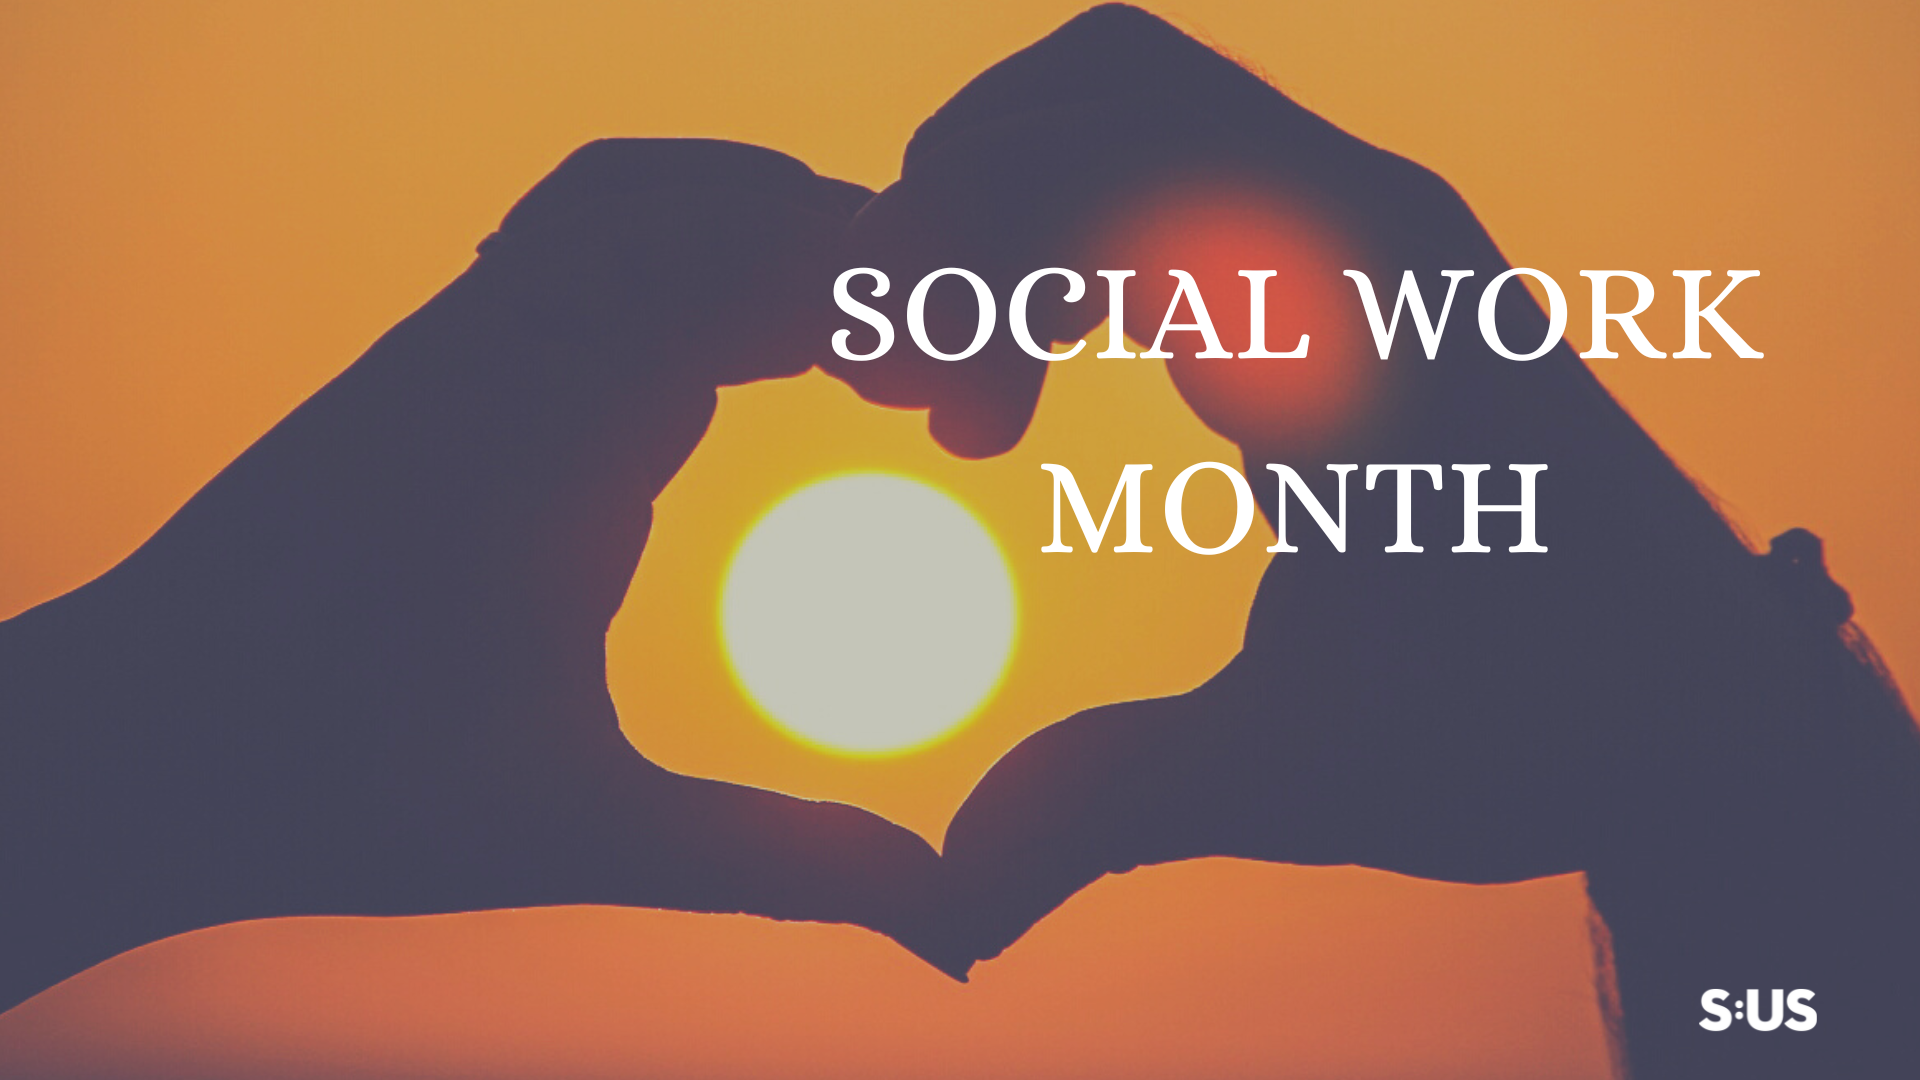 Honoring our Social Workers